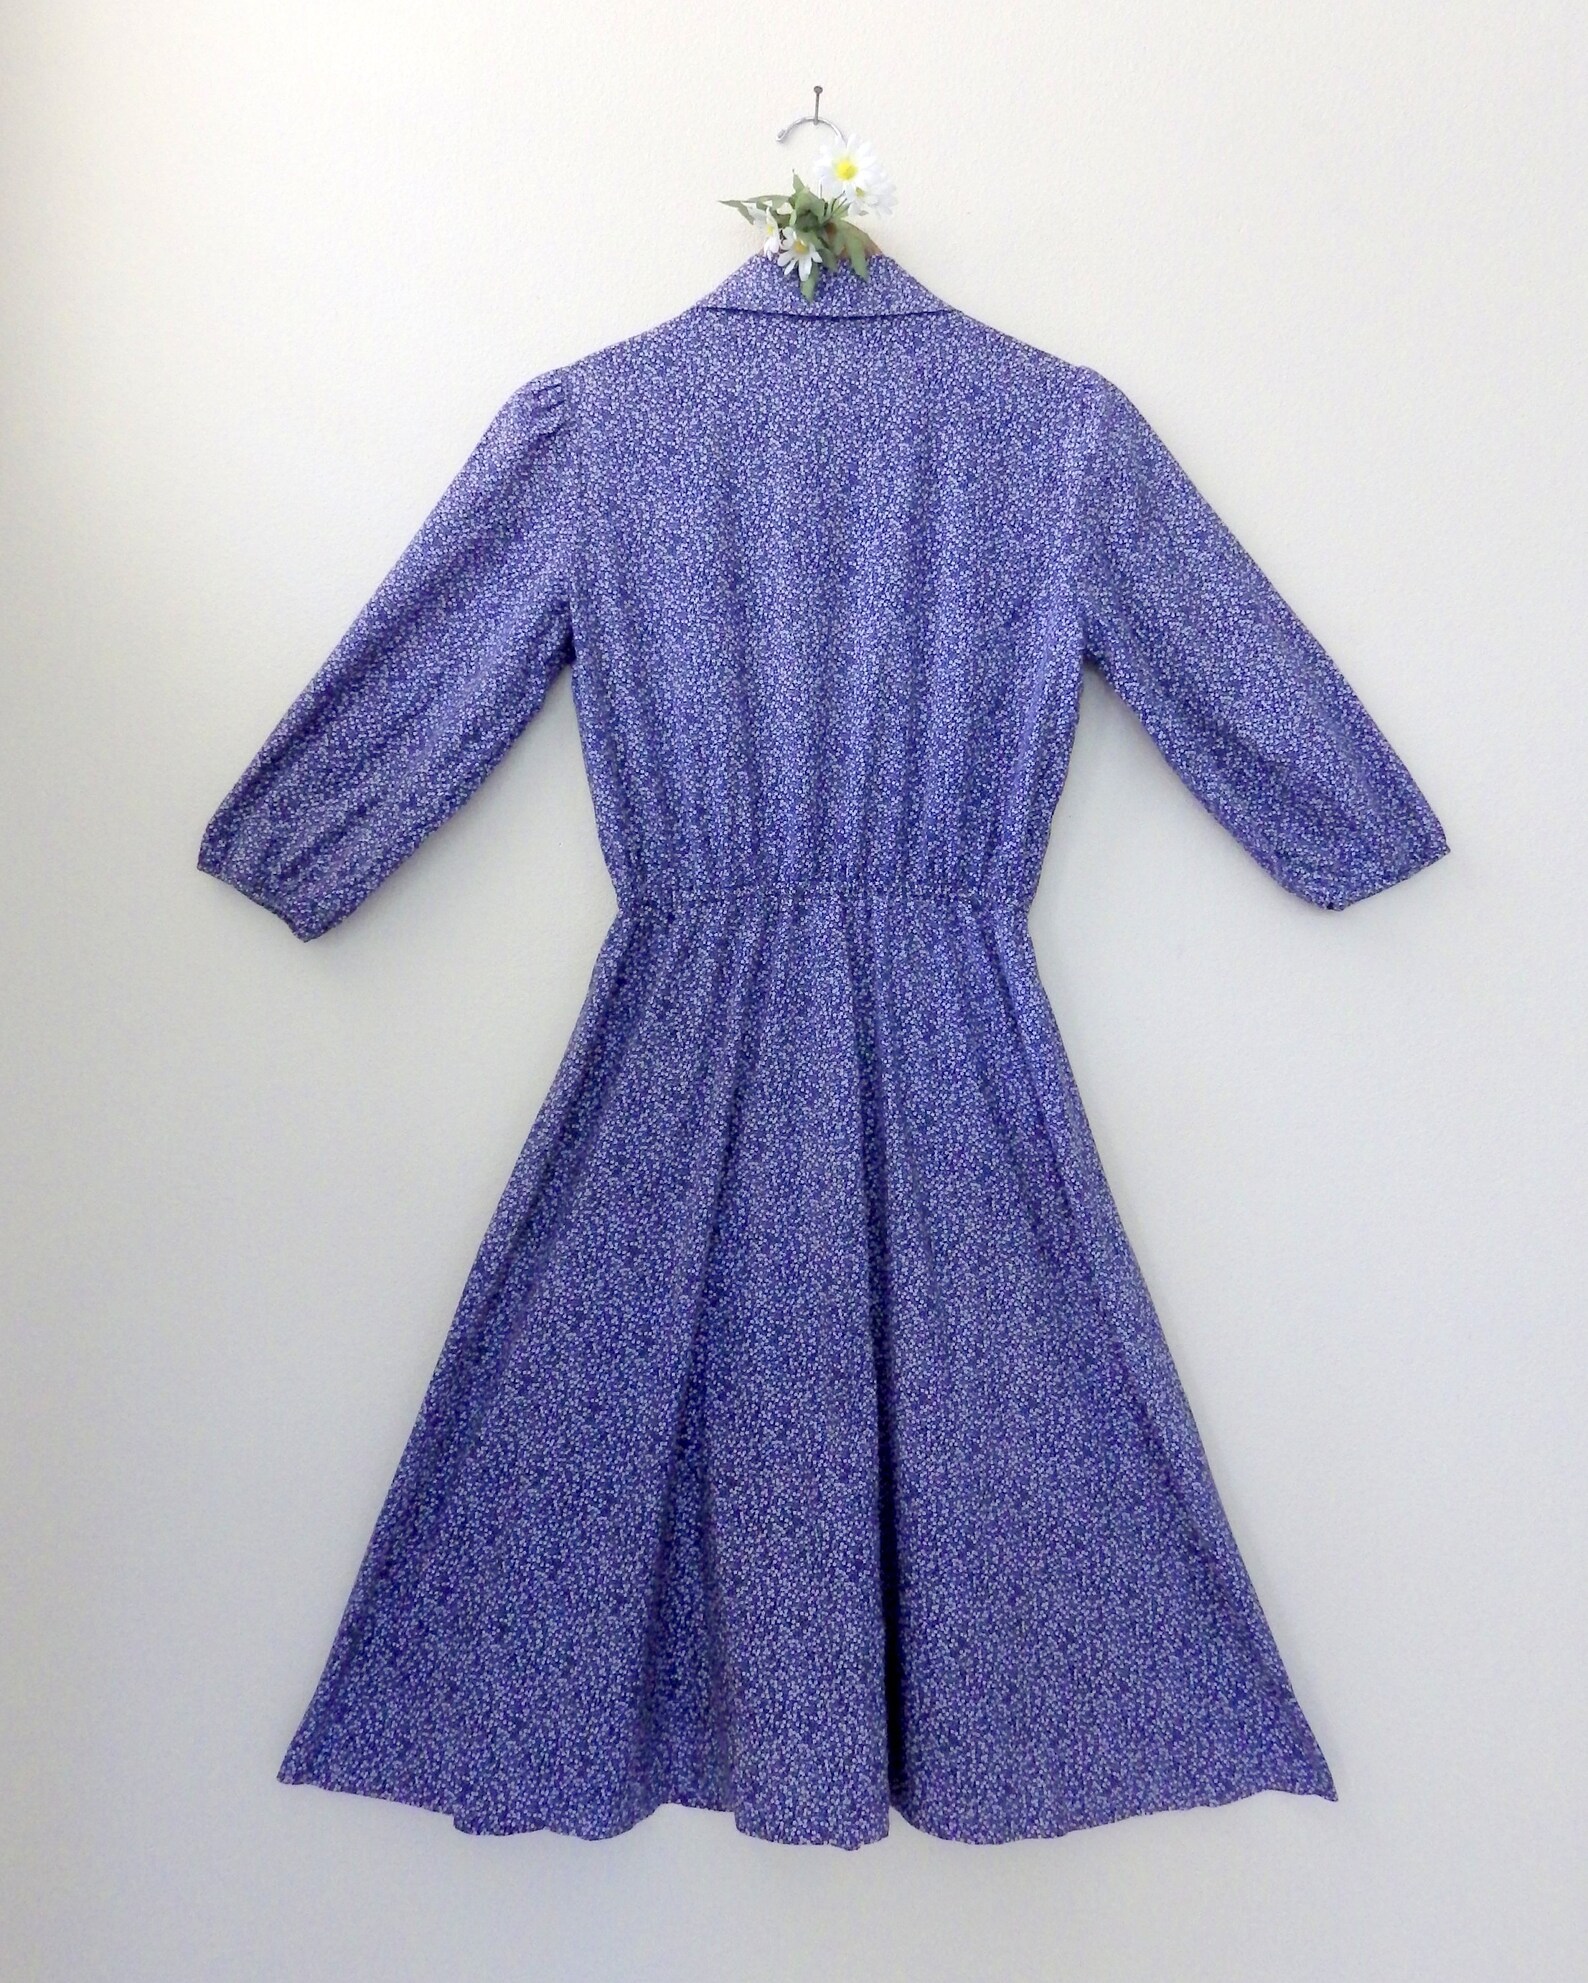 Ms. Sugar Dress // Vintage 1980's // Size Small - Etsy